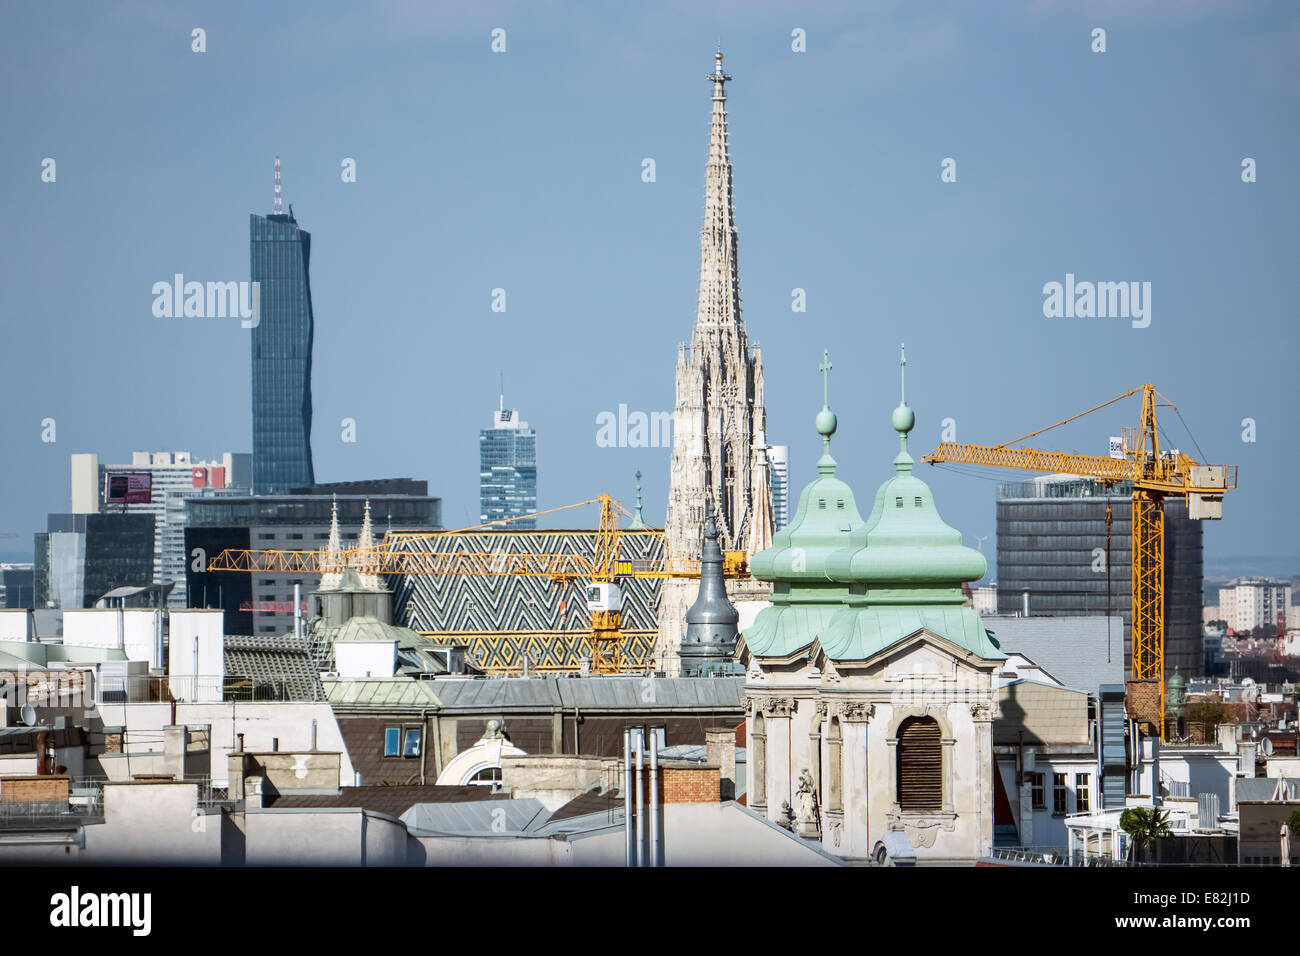 Austria, Vienna, view from Haus des Meeres observation platform to St. Stephen's Cathedral Stock Photo